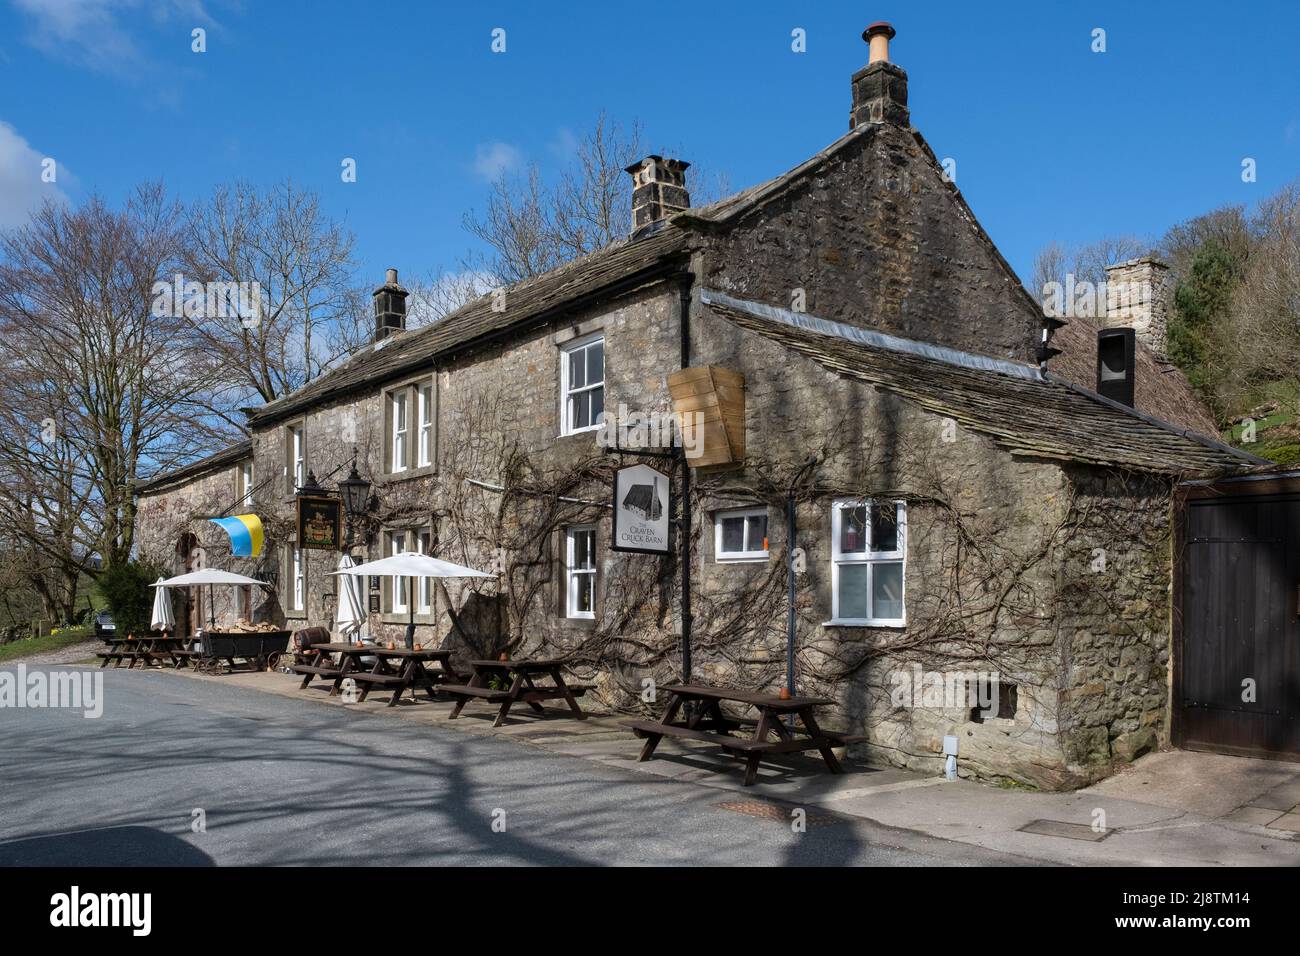 The Craven Arms Pub & Cruck Barn. A 16th-century pub-restaurant located in Appletreewick, Wharfedale, Yorkshire, UK Stock Photo